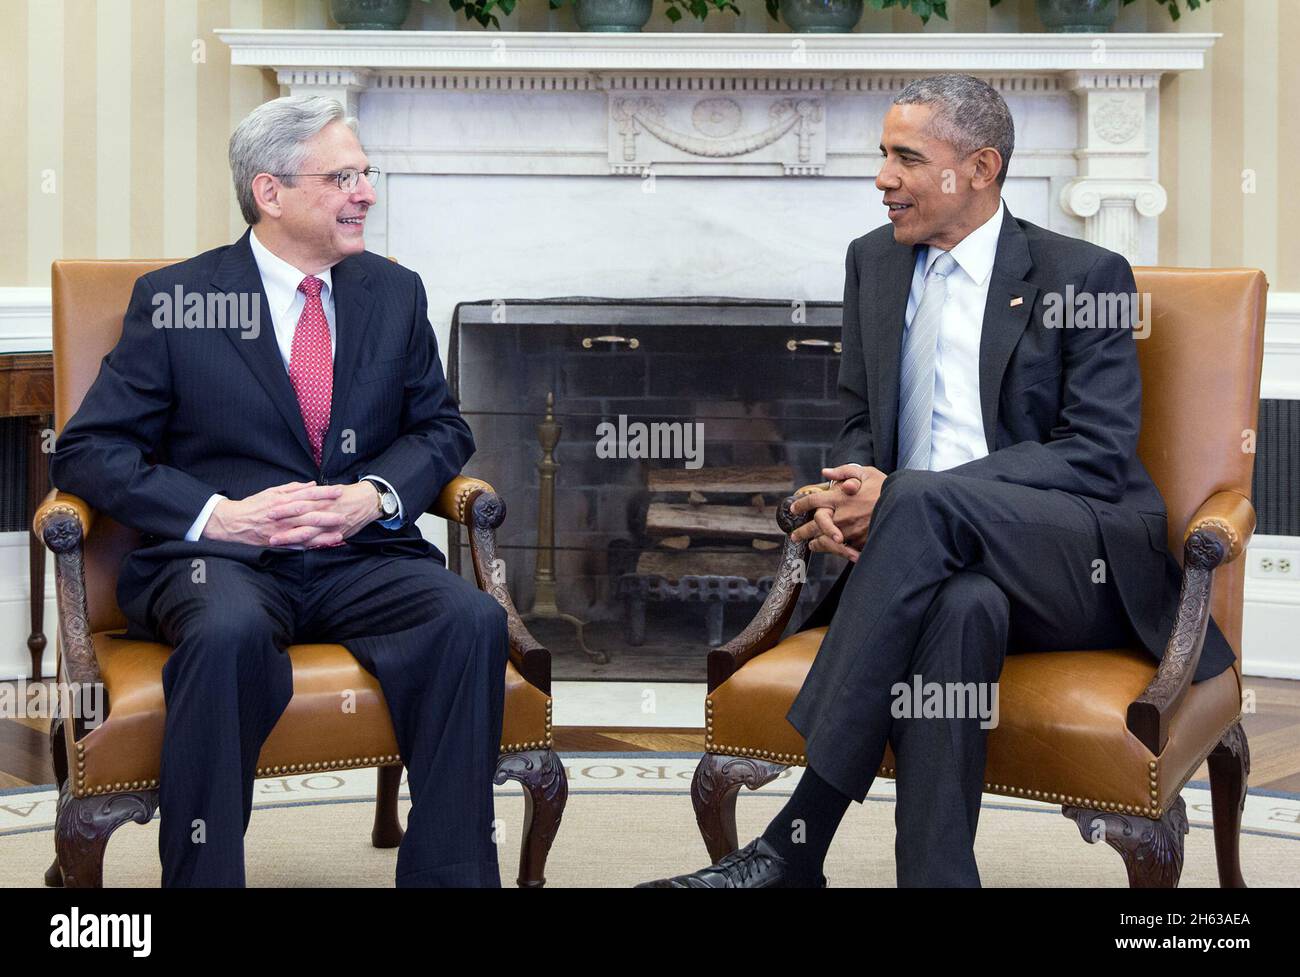 President Barack Obama meets with Judge Merrick B. Garland in the Oval Office, March 9, 2016. Stock Photo